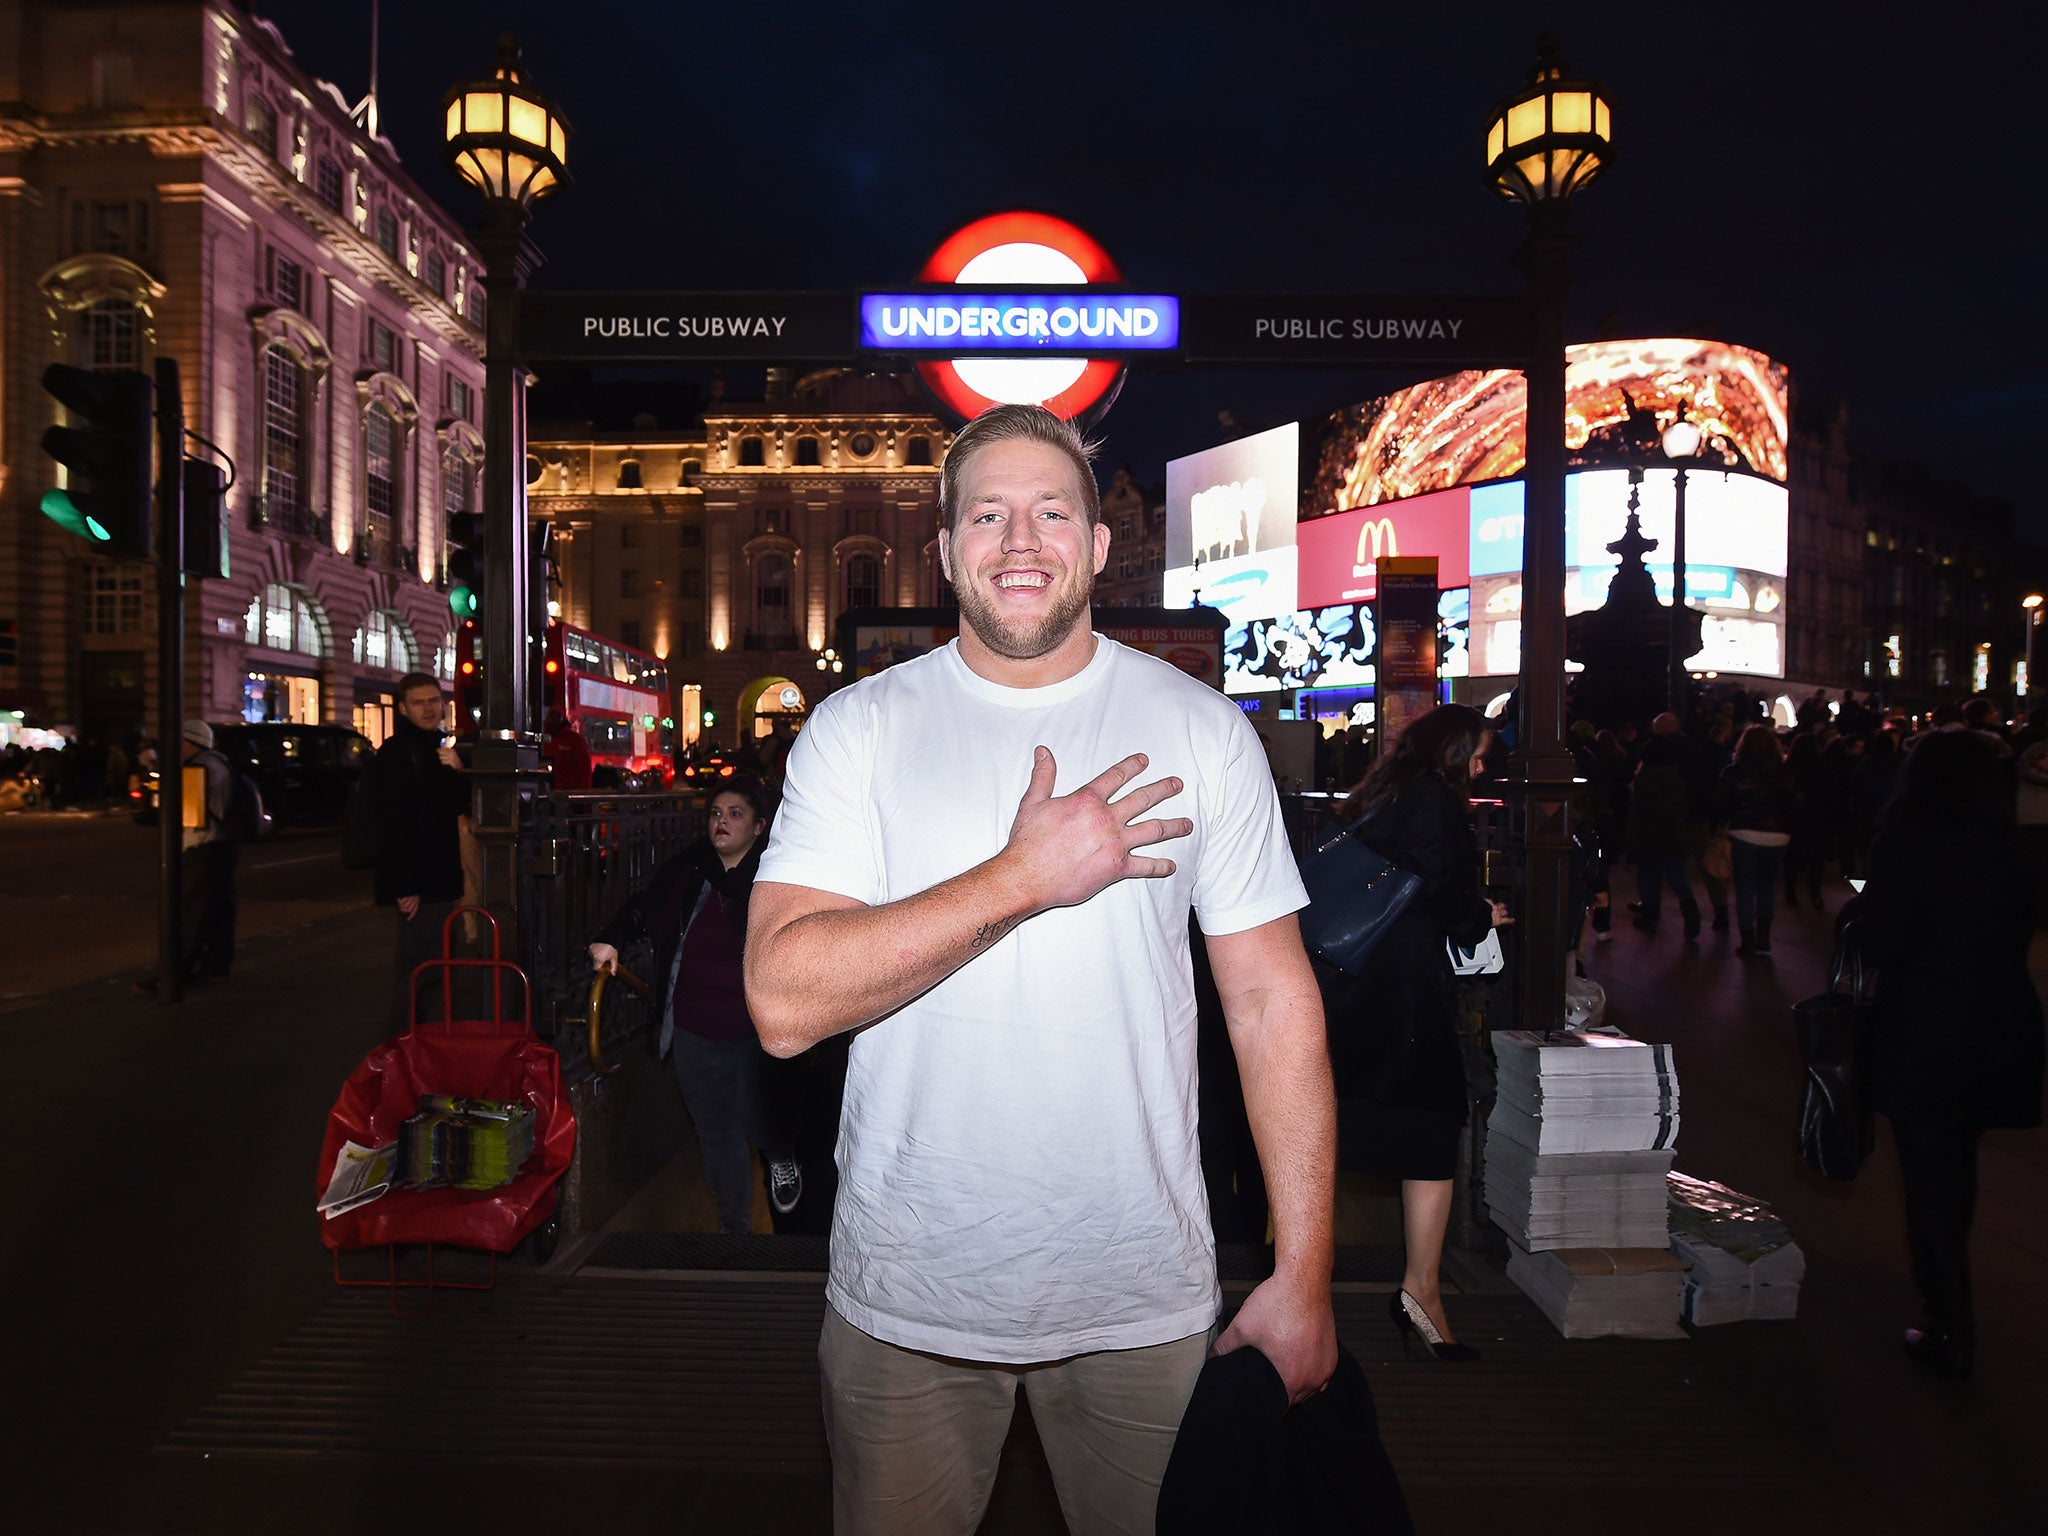 Swagger then took a look around central London as seen here in Piccadilly Circus